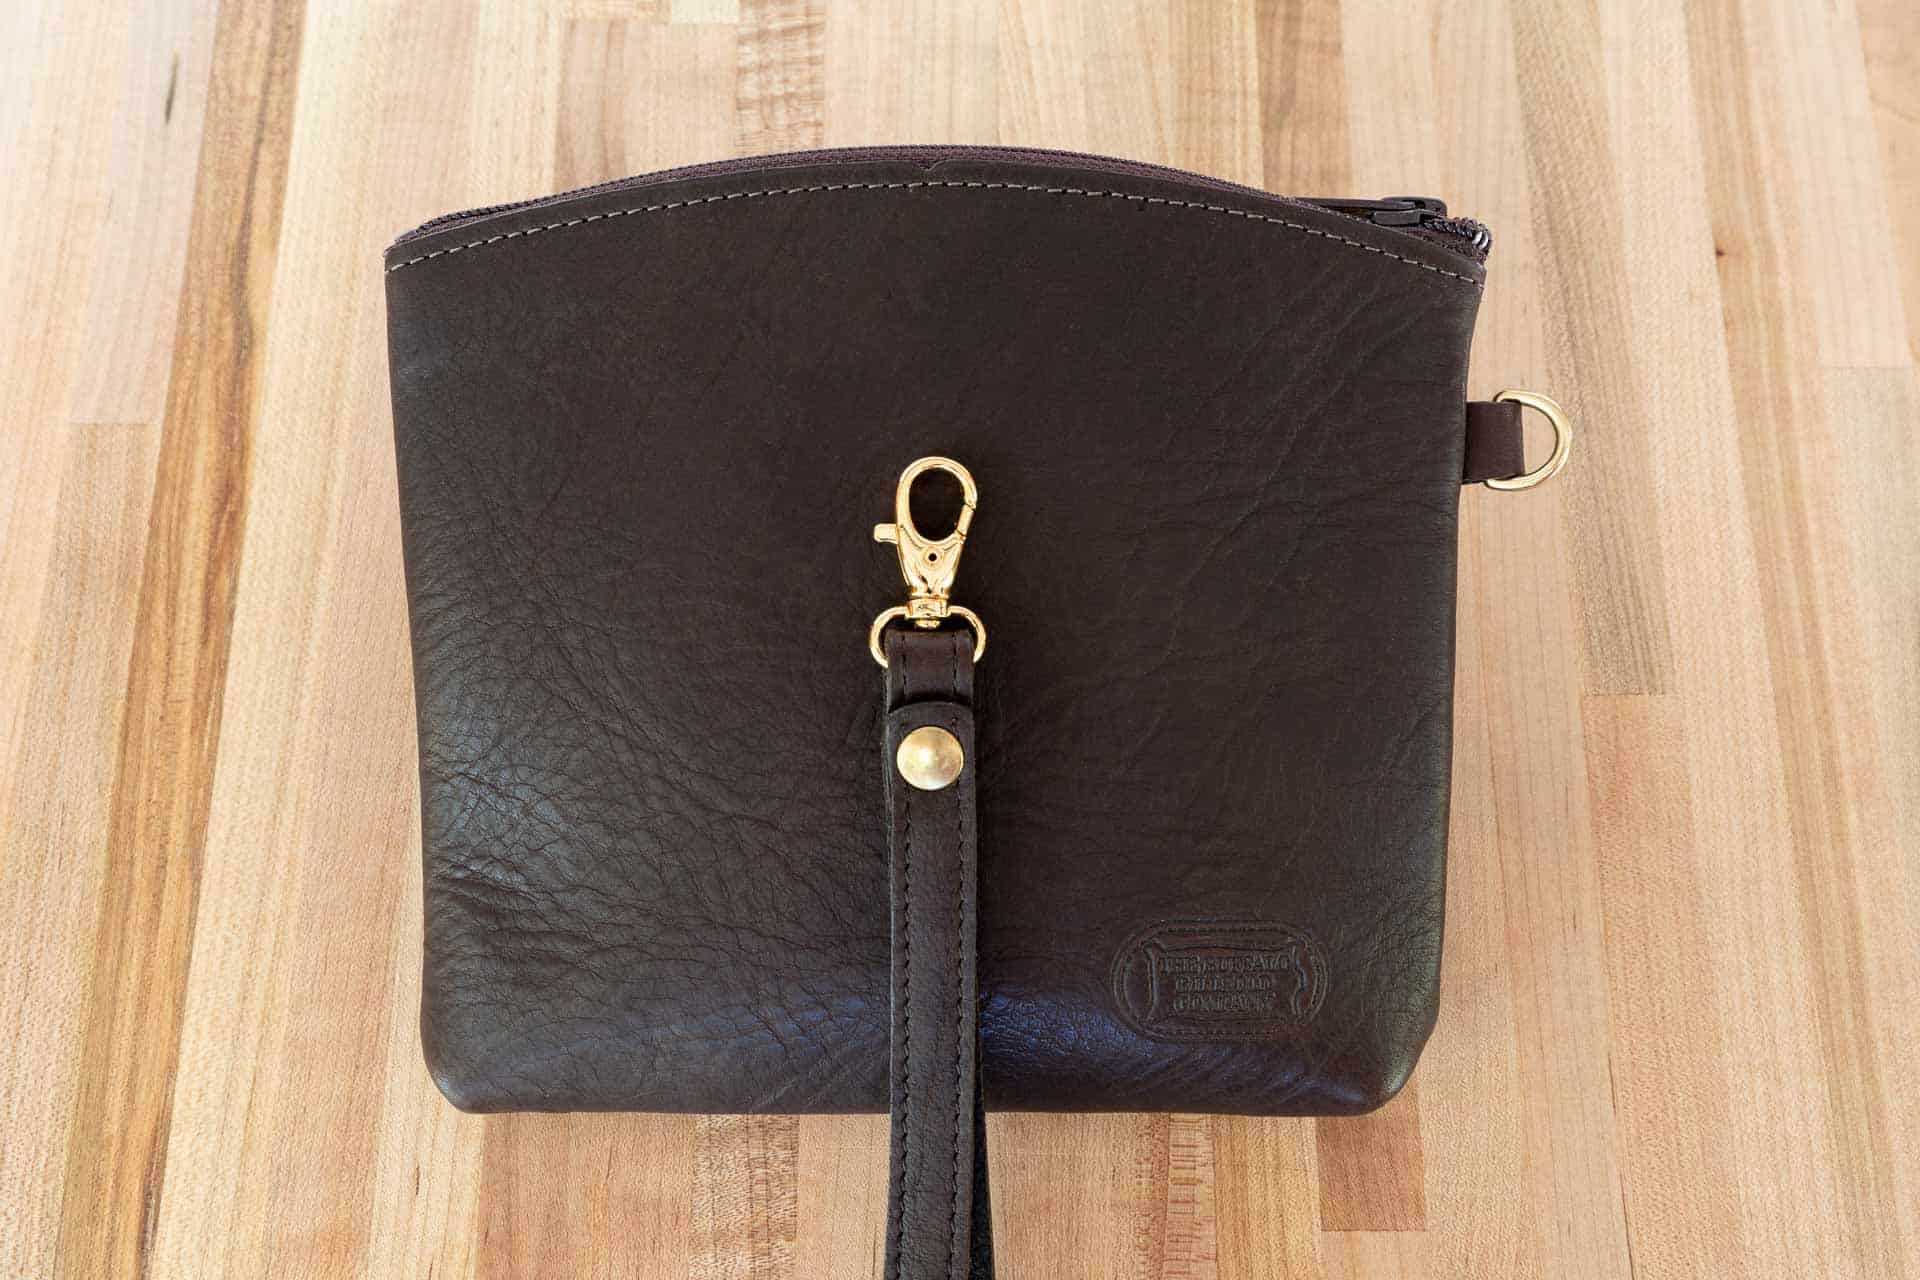 Brown Buffalo Leather Wristlet Pouch - Wrist Bag - Made in USA